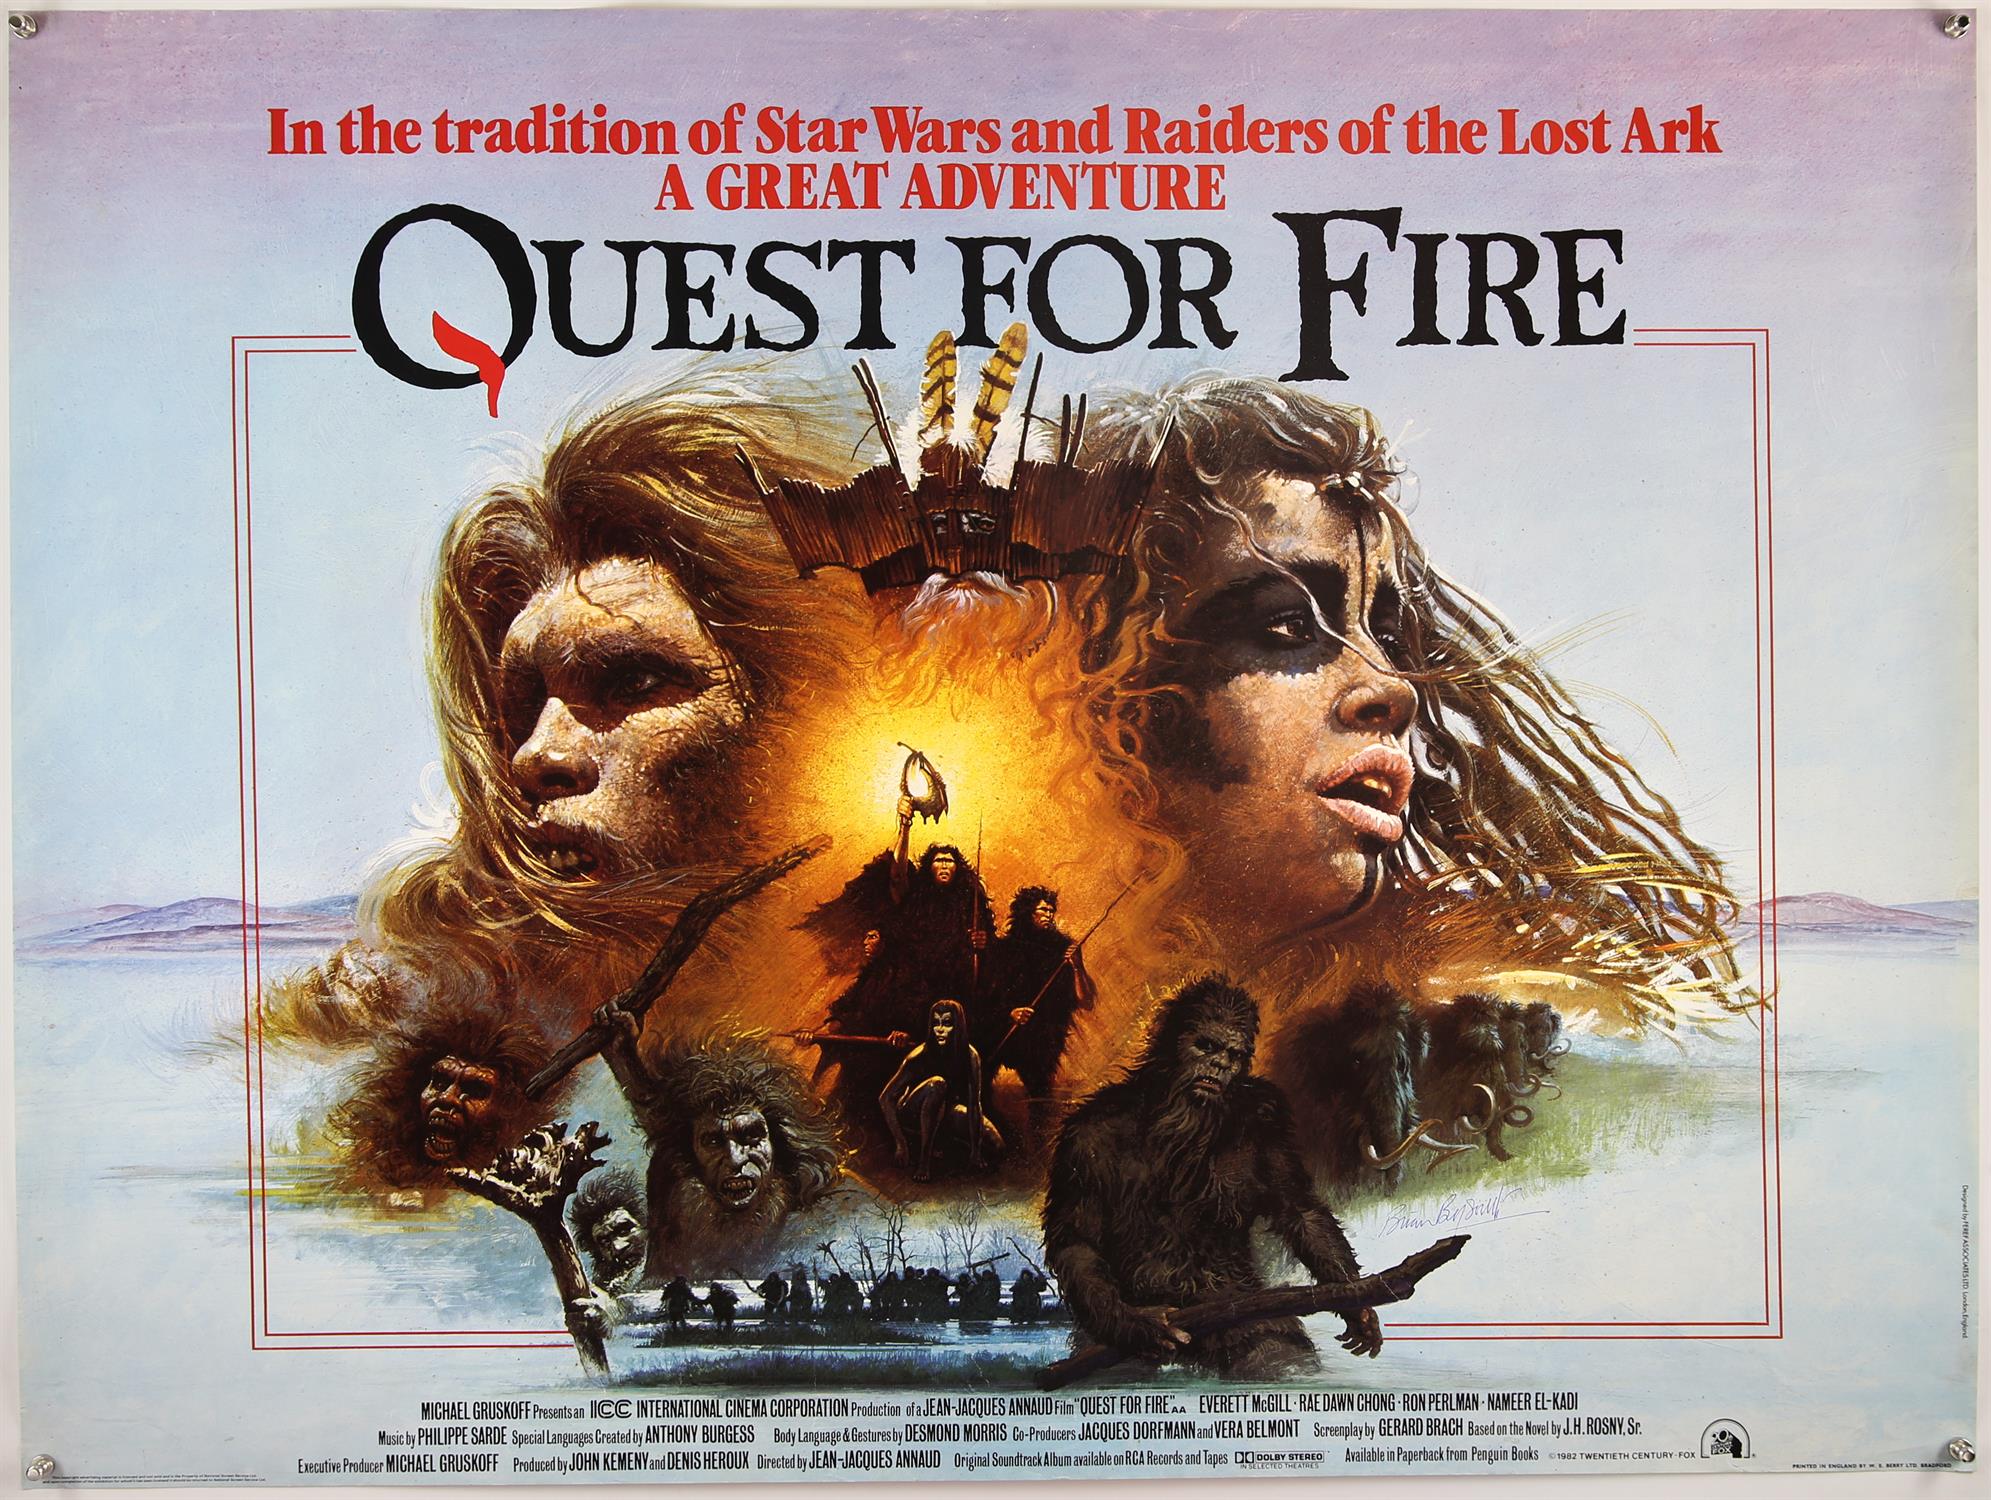 Quest for Fire (1981) British Quad film poster, signed by Brian Bysouth, rolled, 30 x 40 inches.